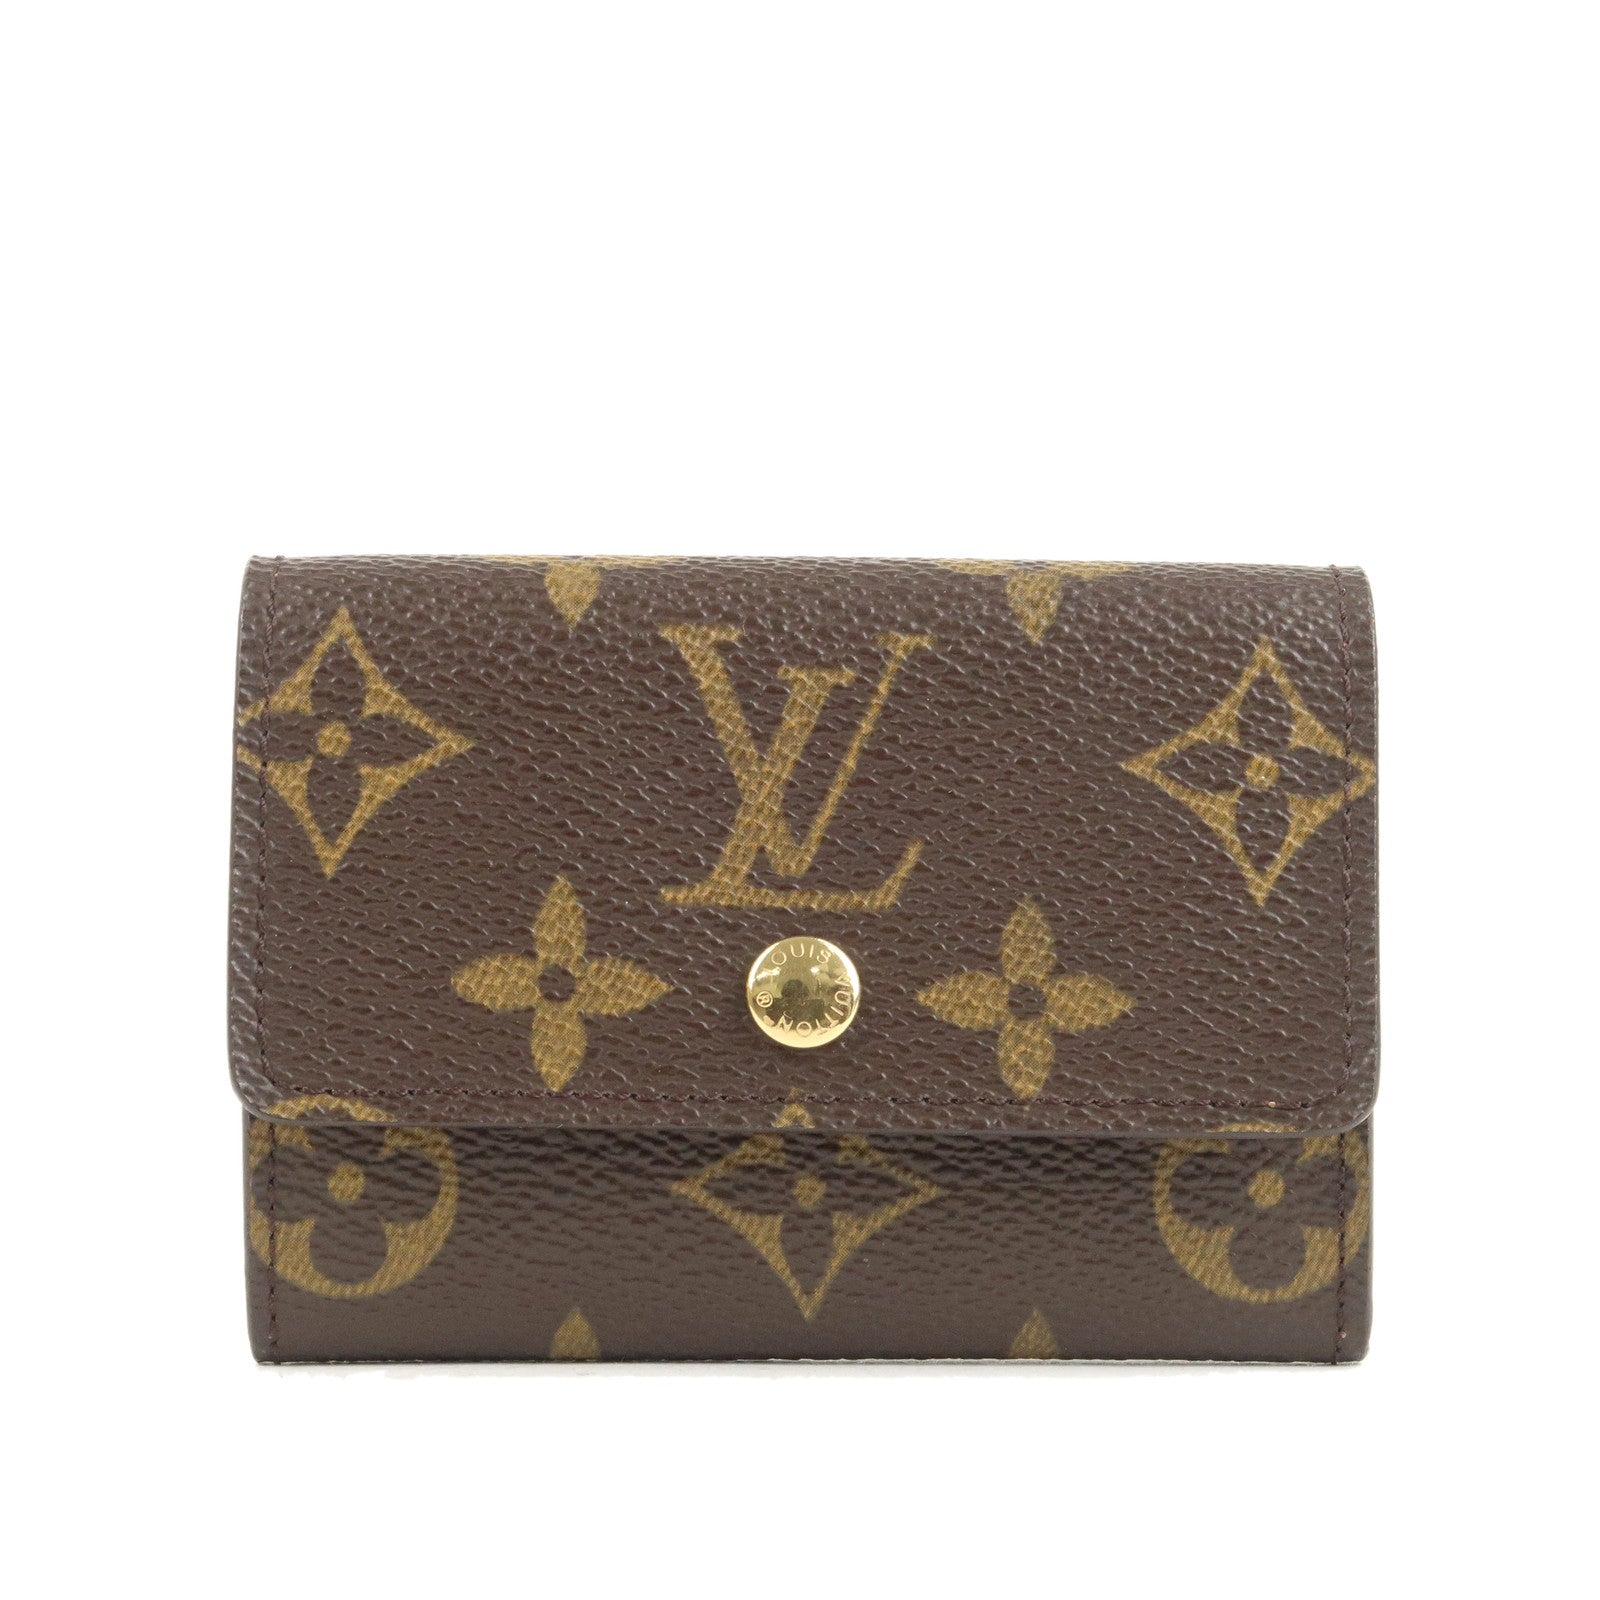 Louis Vuitton Leather Wallet for Women - Great Condition-Slight Peeling